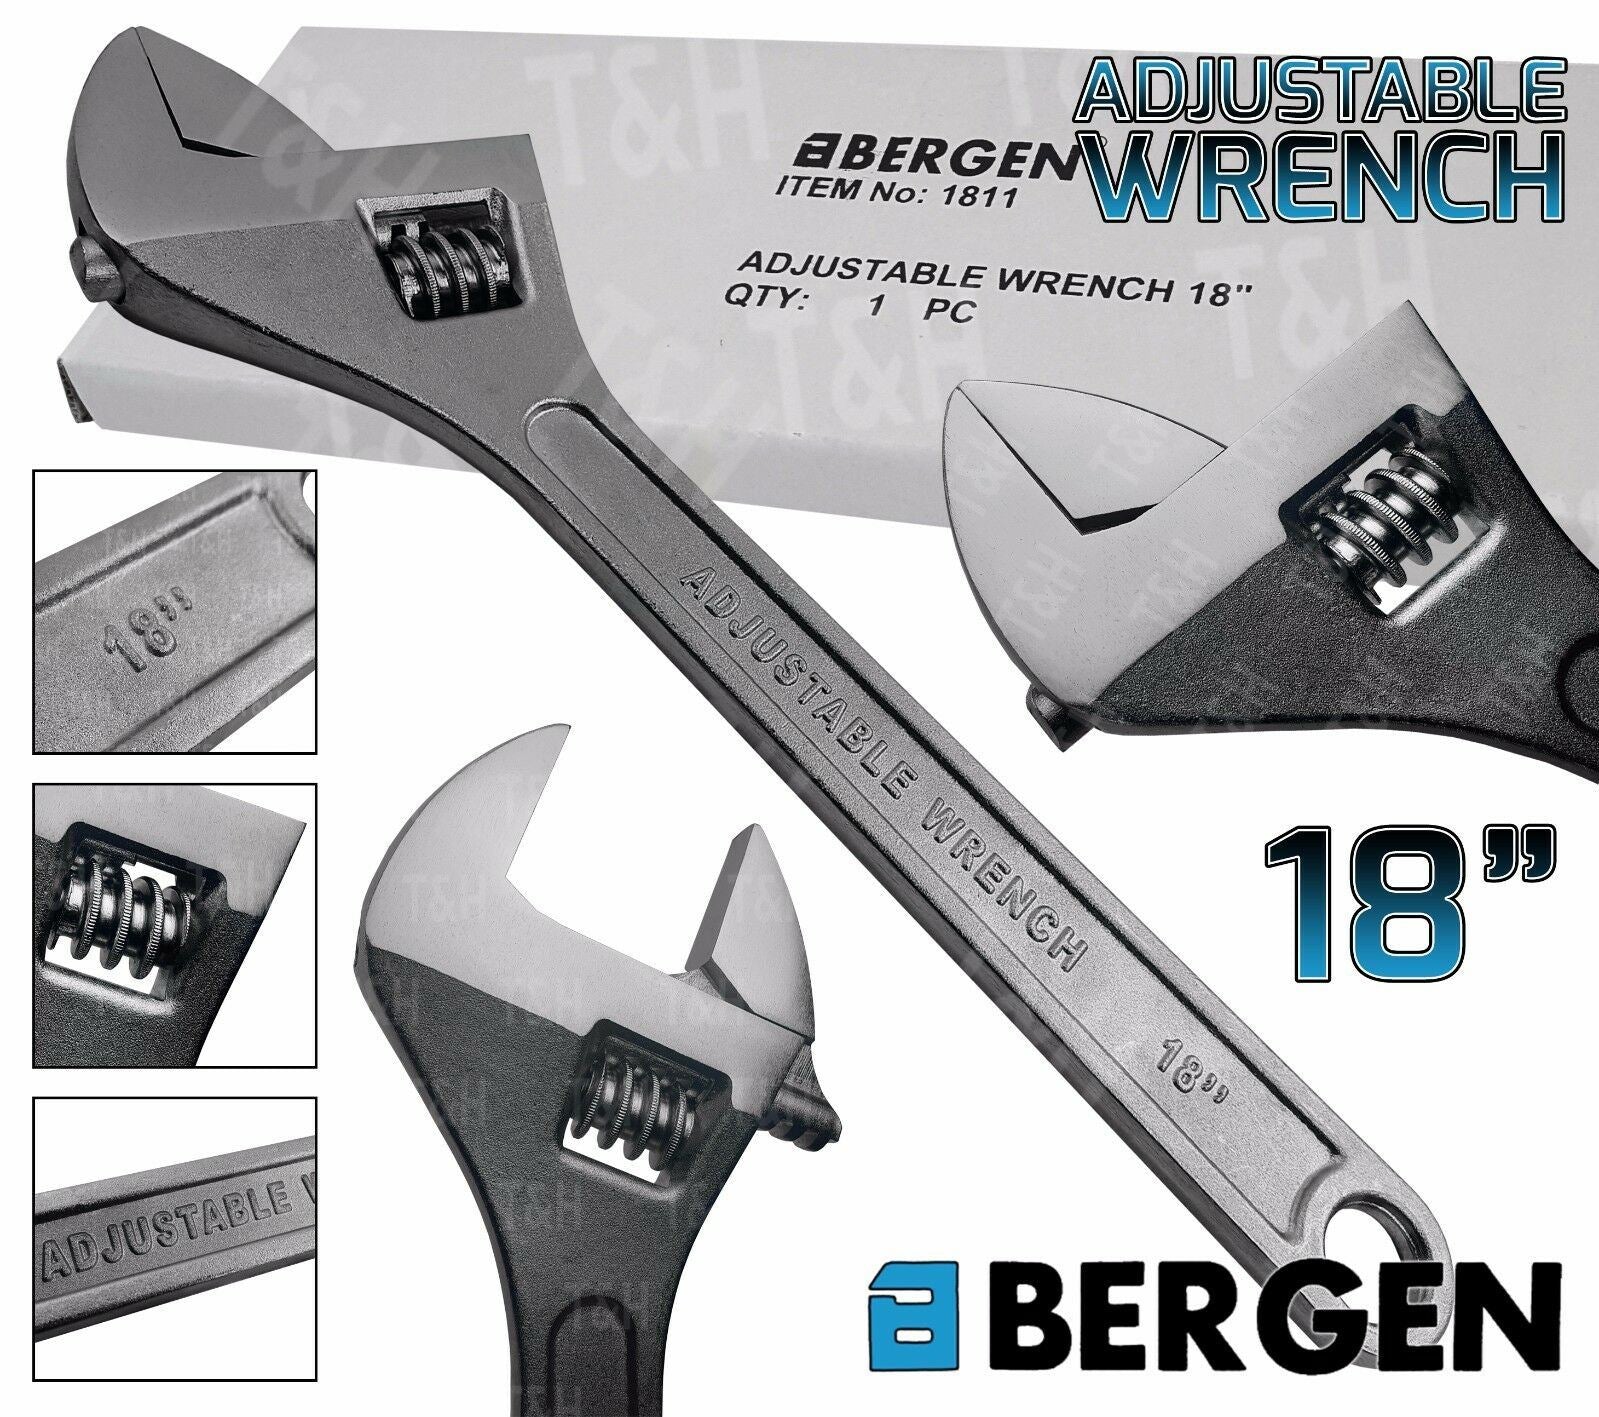 US PRO 18" ADJUSTABLE WRENCH